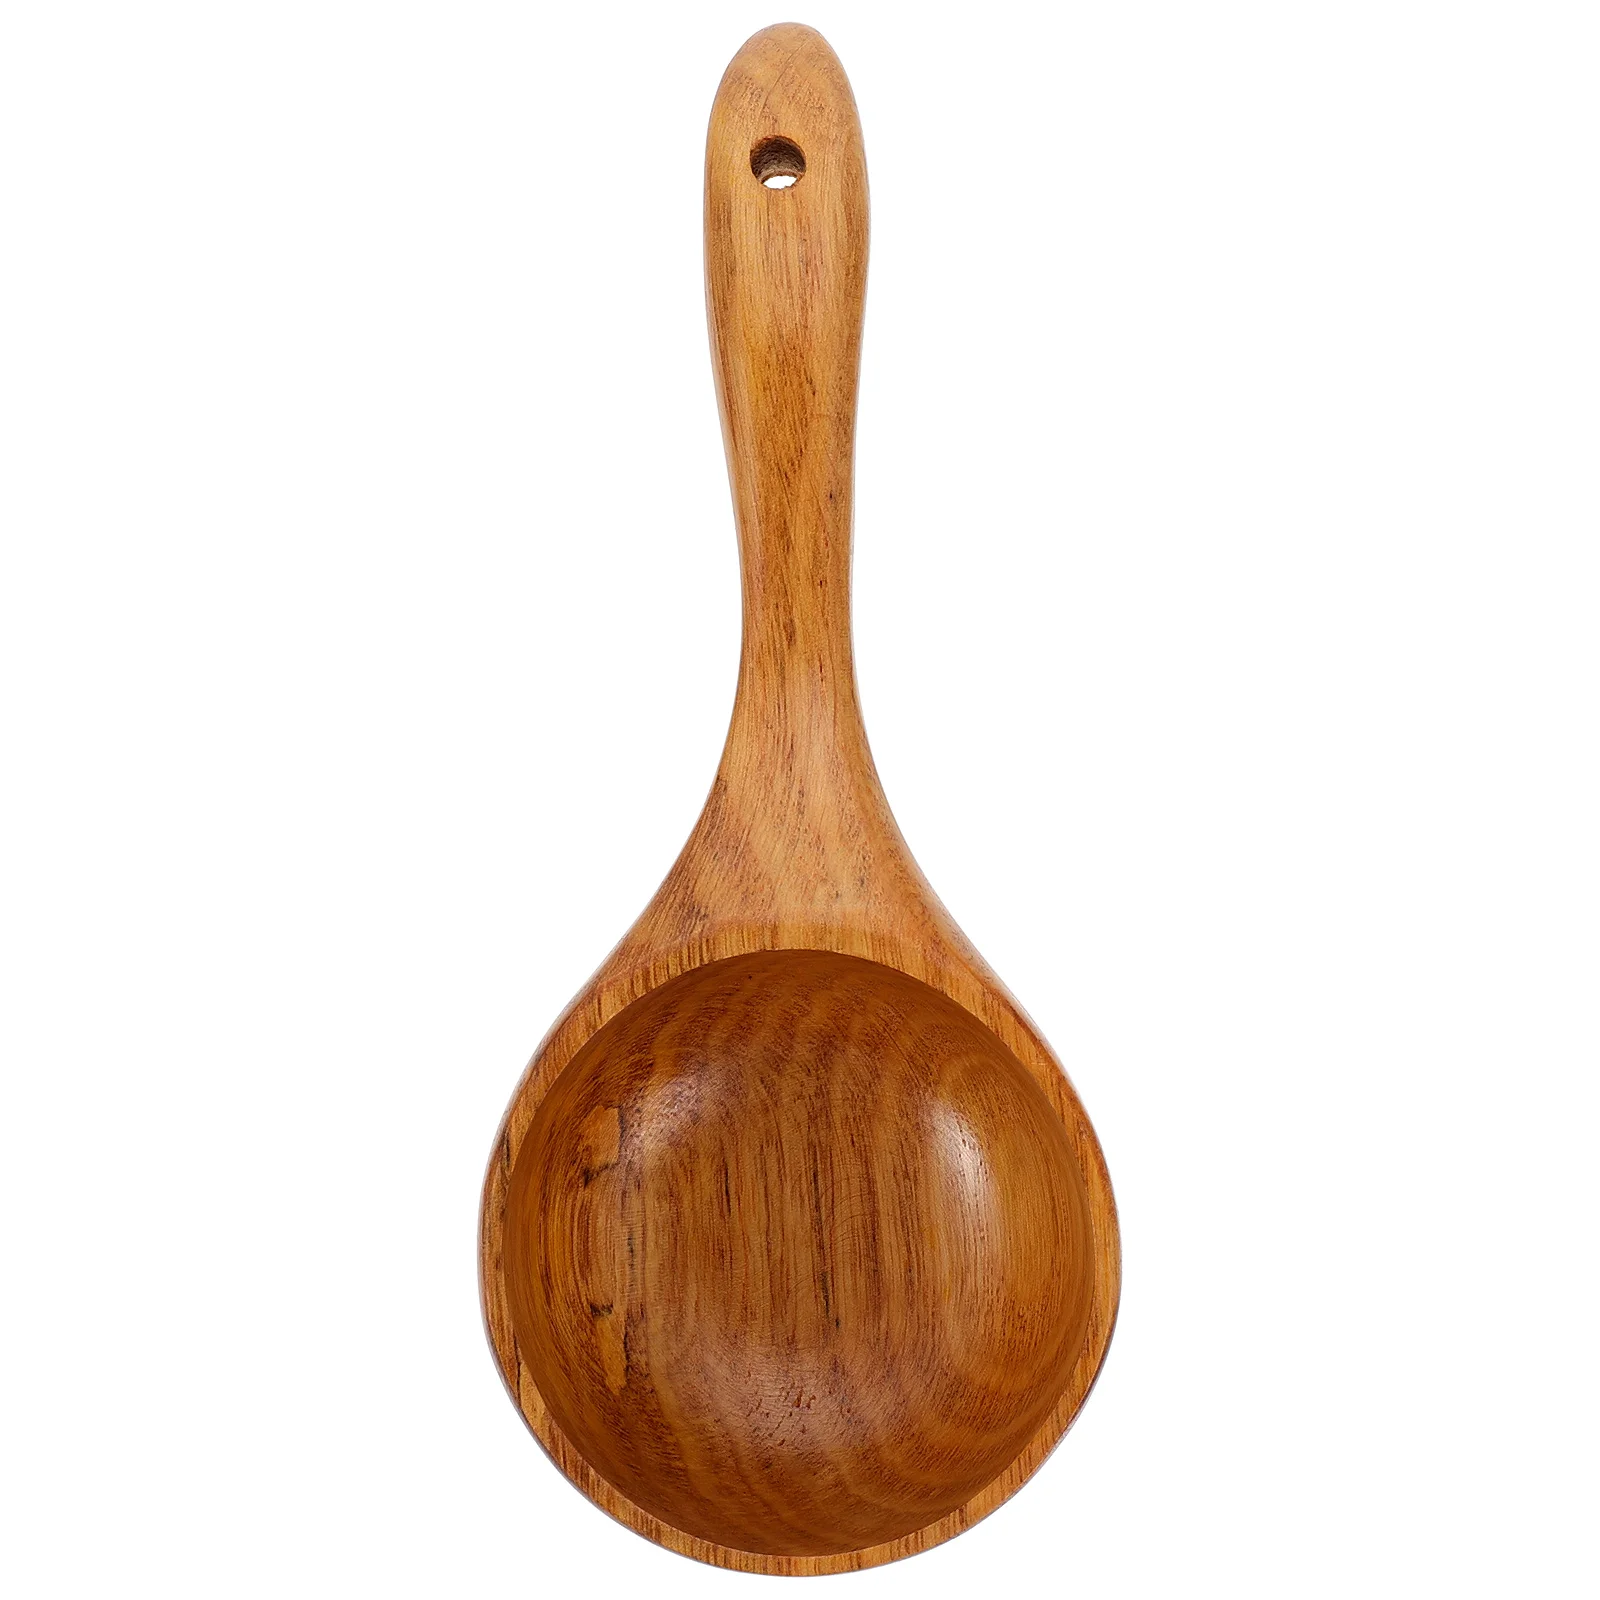 

Scoop Water Spoon Ladle Kitchen Spoons Wooden Soup Wood Ladles Bath Cup Japanese Dipper Home Scoopsramen Serving Cooking Handle